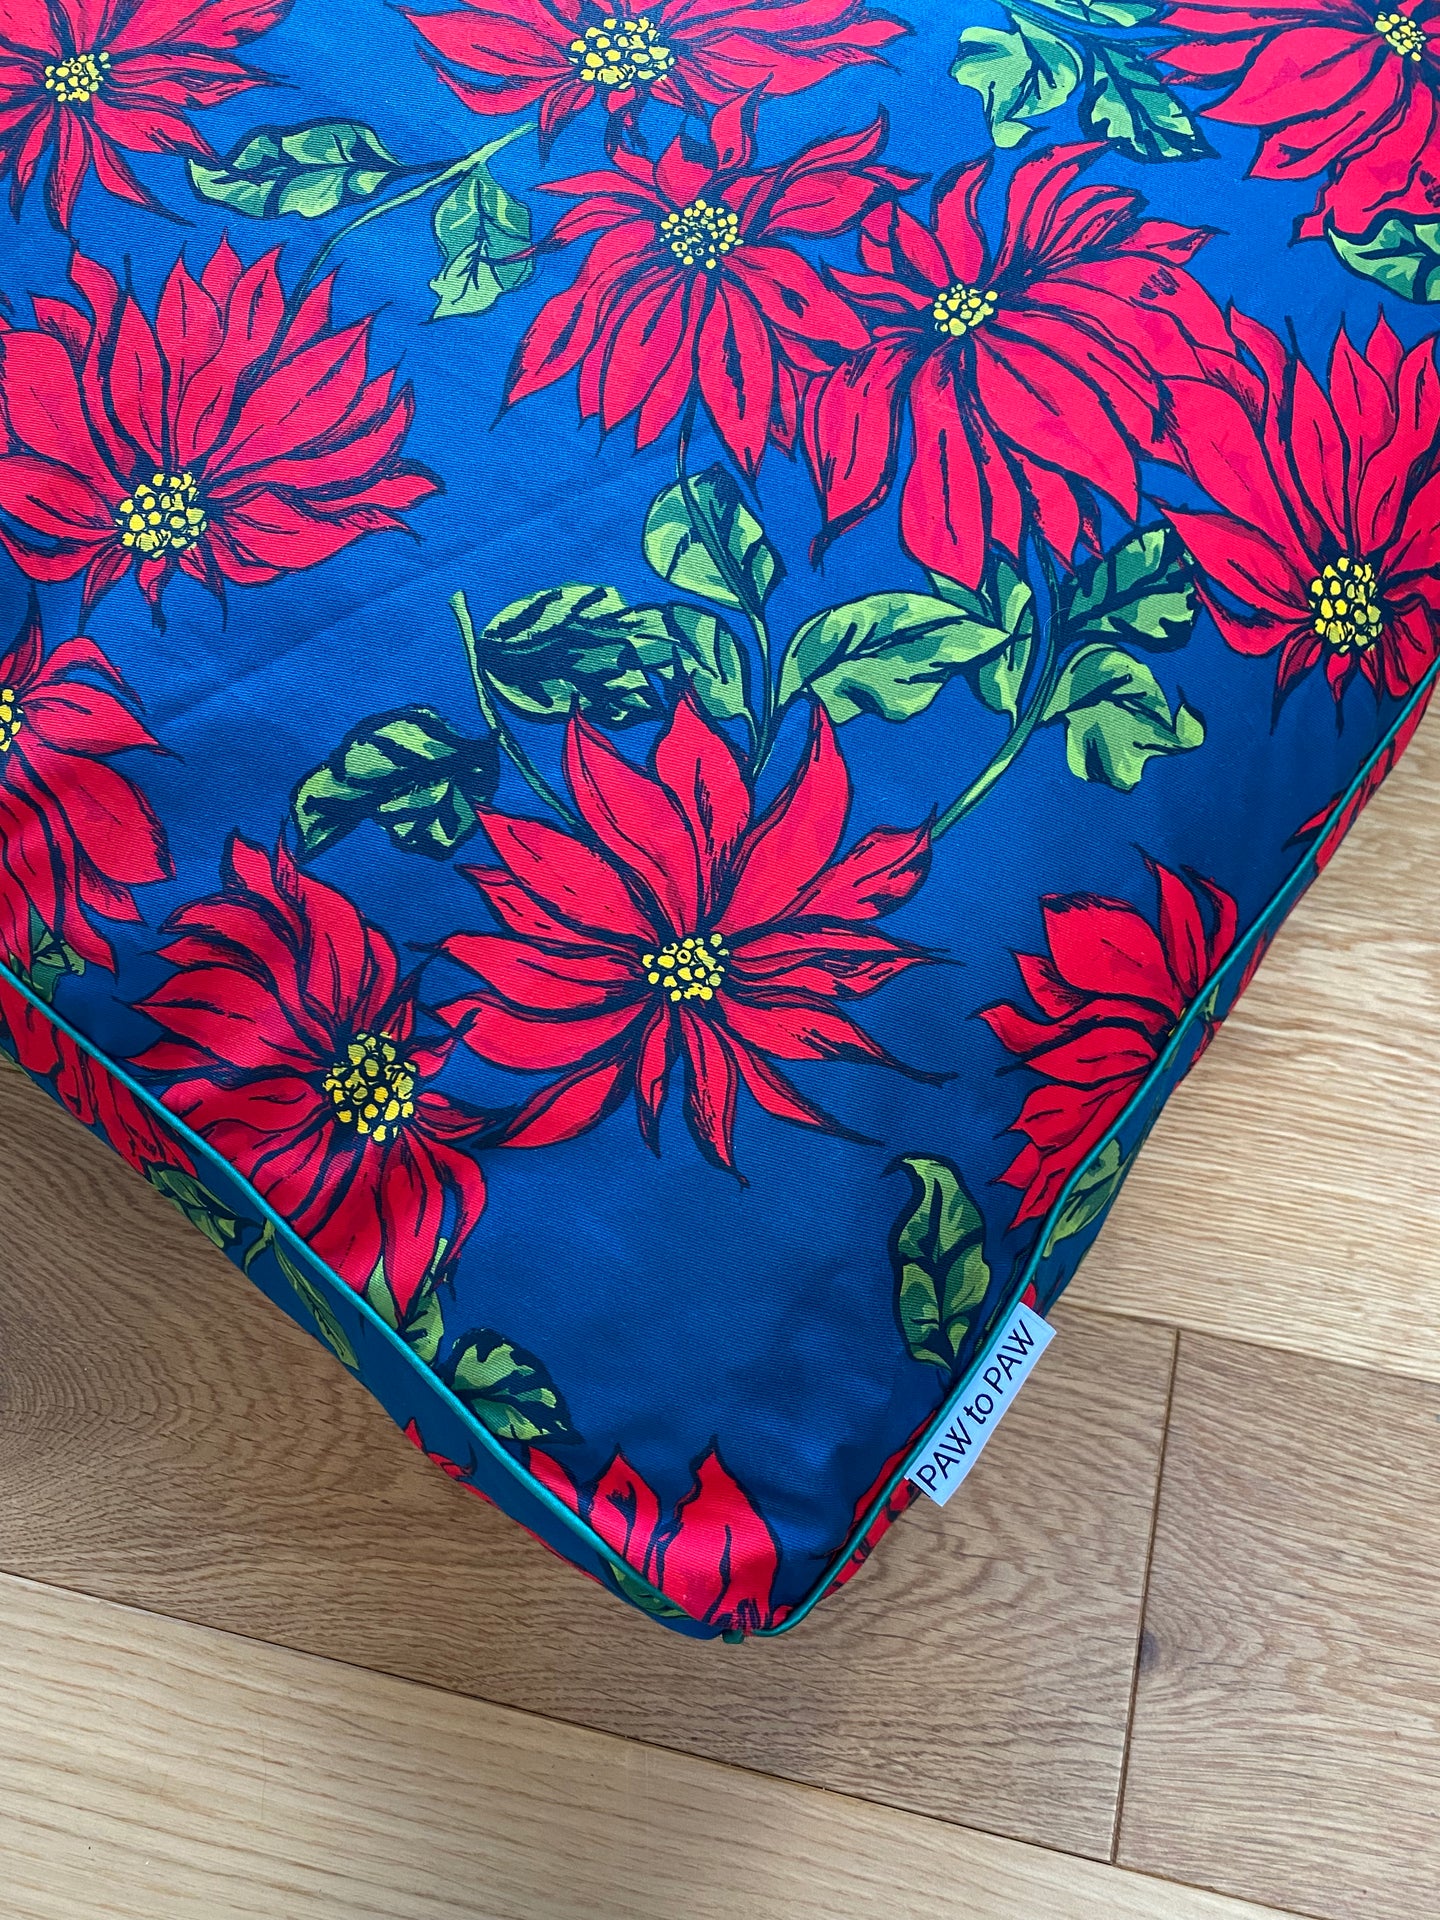 Festive floral bed cover   Limited edition print